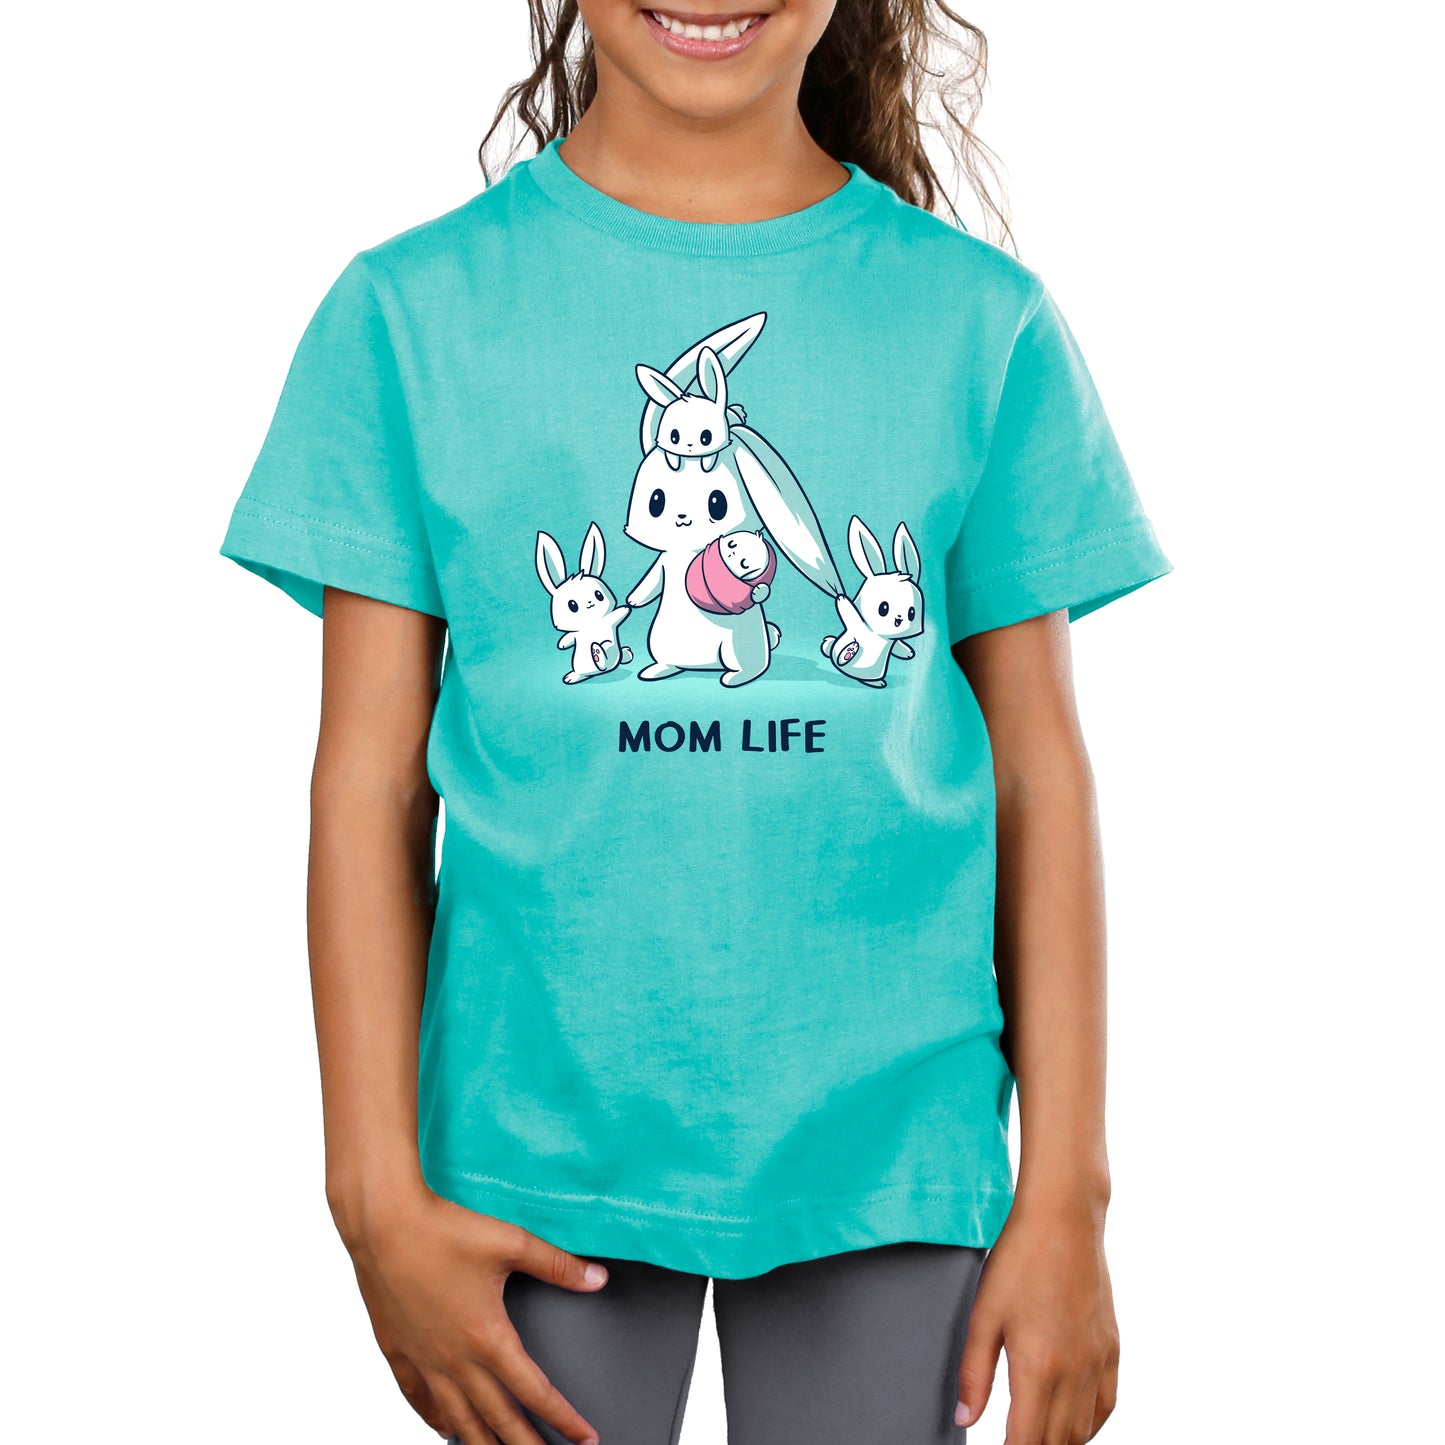 A child is shown from the waist up wearing a Caribbean Blue monsterdigital t-shirt with a cartoon of a mother rabbit carrying a baby rabbit, flanked by two smaller rabbits. The text "MOM LIFE" is below the illustration.